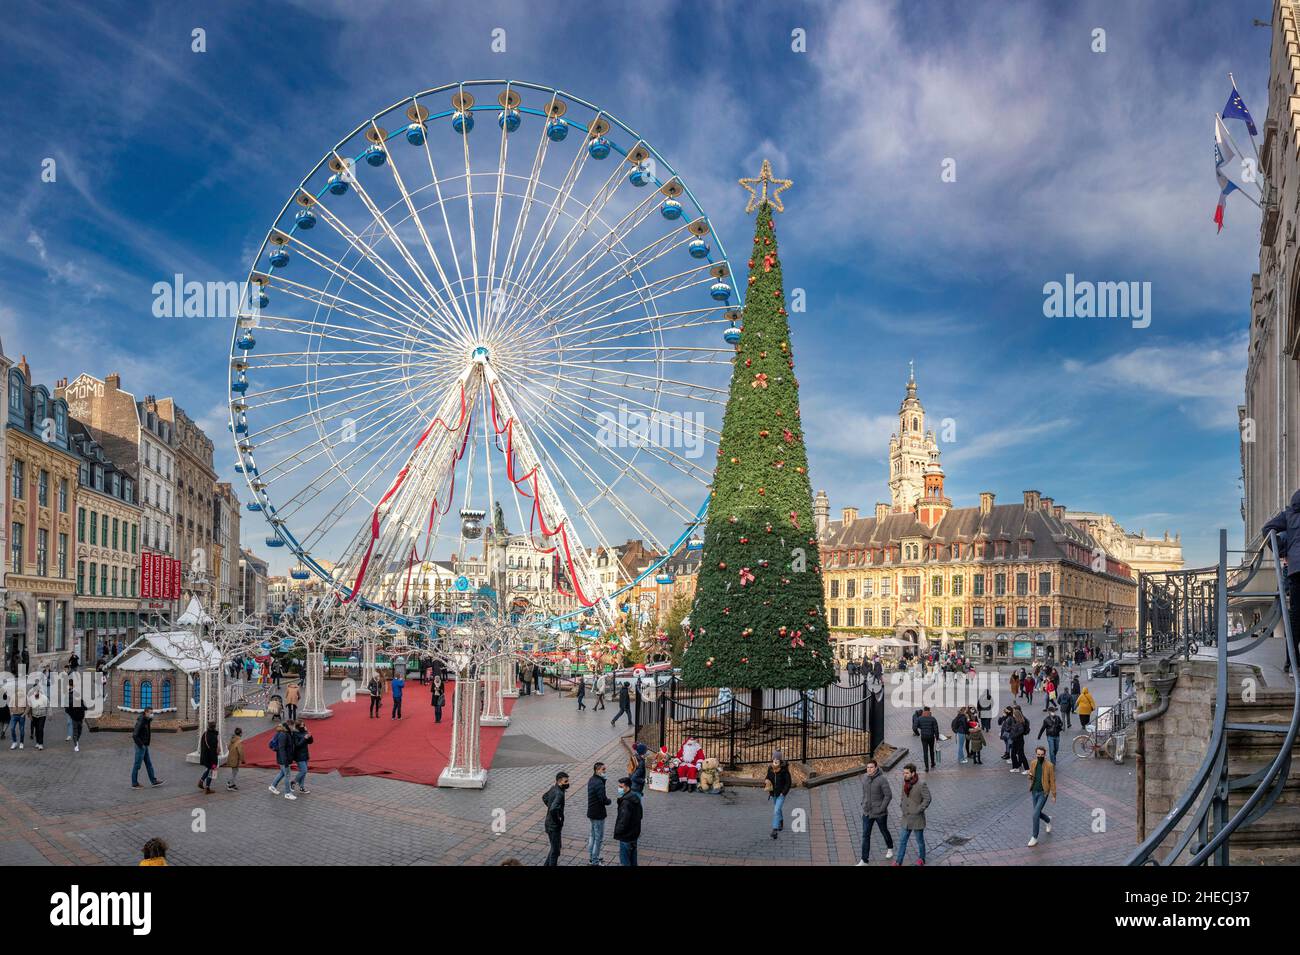 France, Nord, Lille, the Ferris wheel installed during the Christmas season on the Place du General de Gaulle or Grand Place Stock Photo